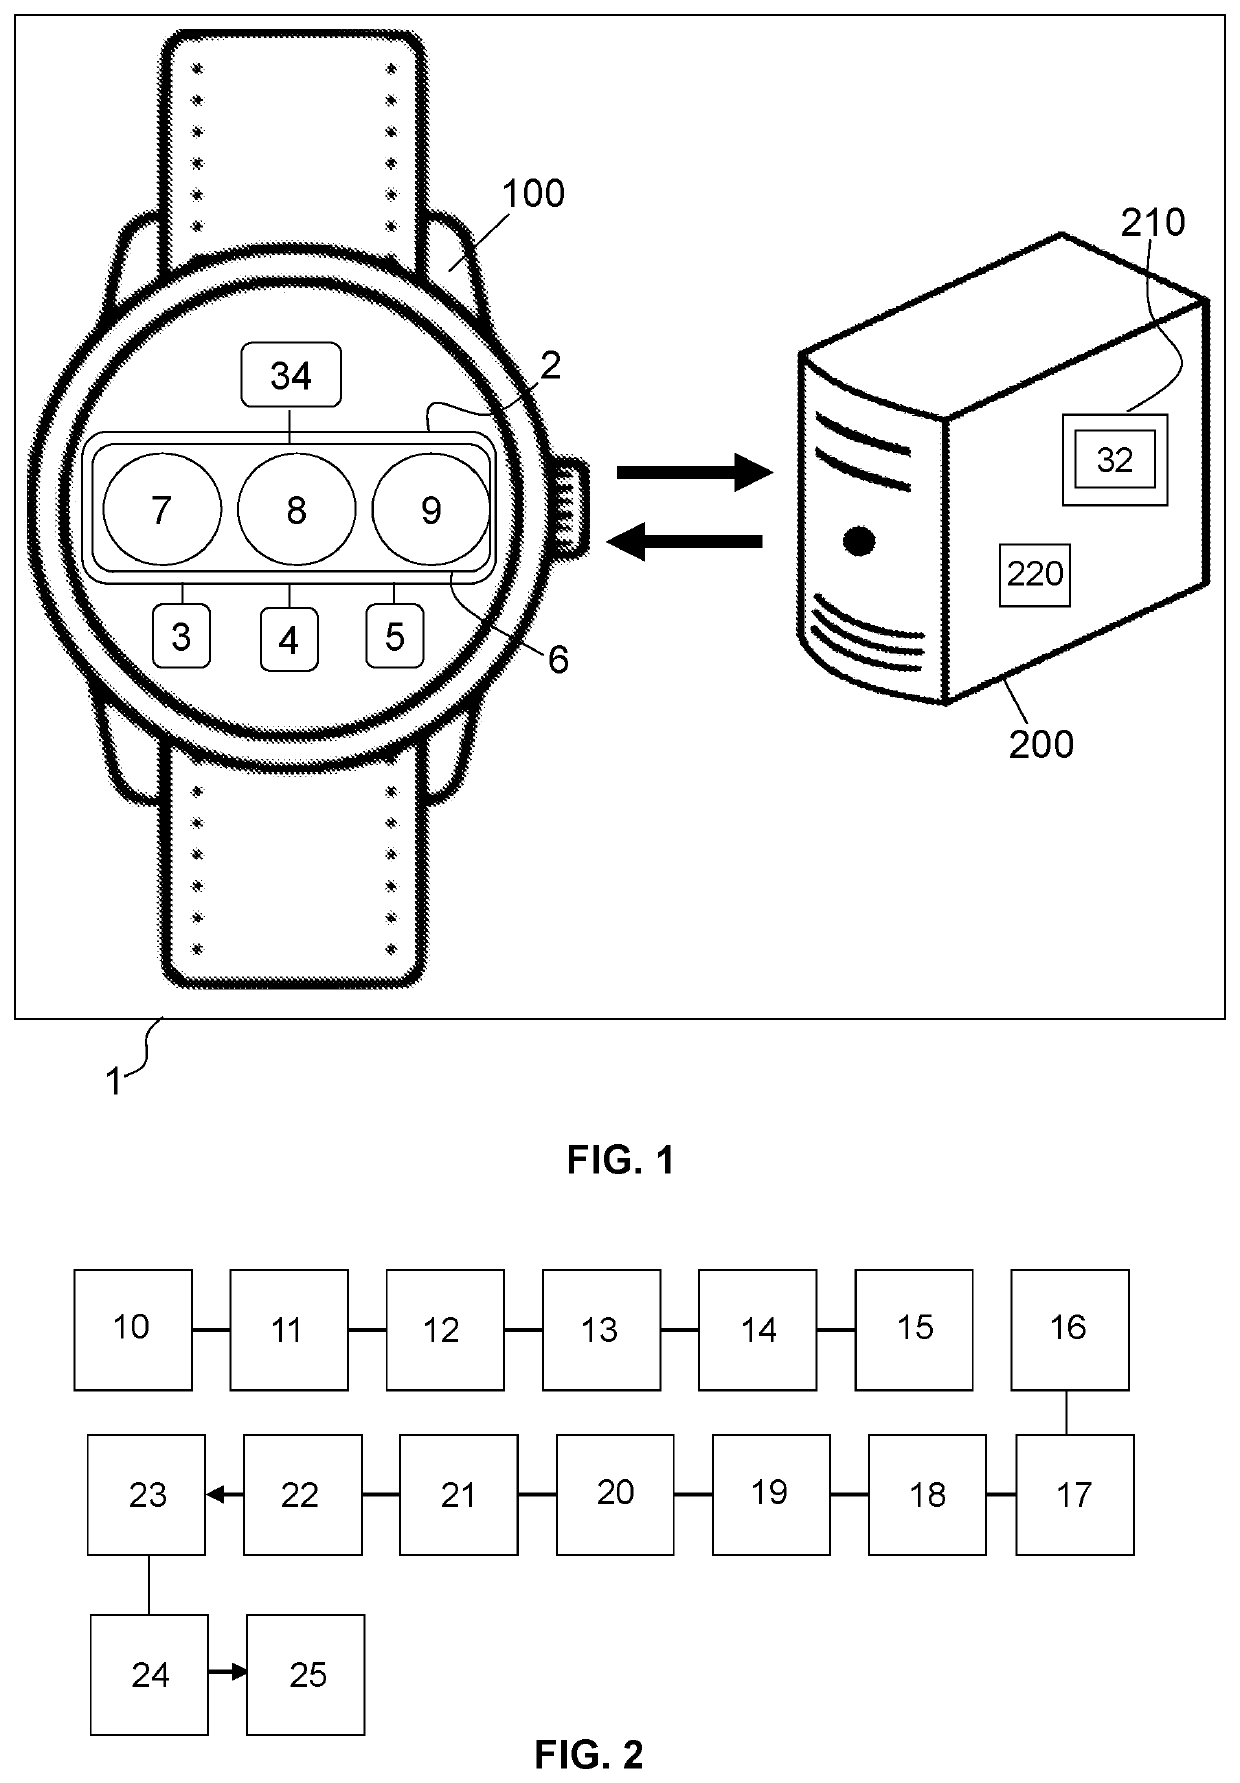 Method for securely connecting a watch to a remote server